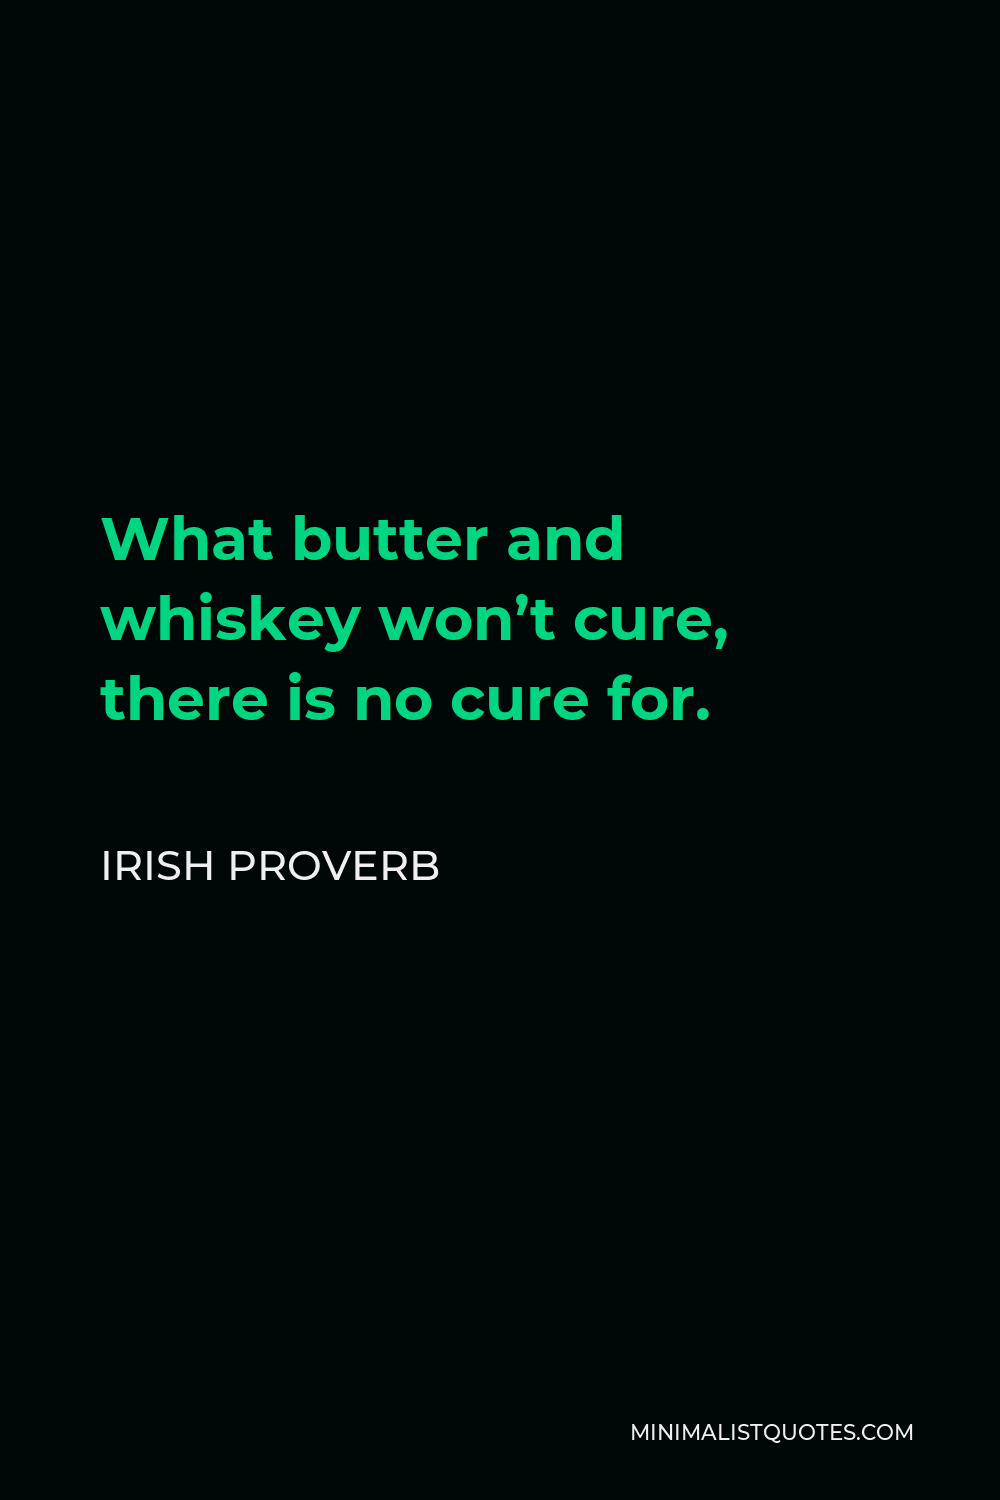 Irish Proverb Quote - What butter and whiskey won’t cure, there is no cure for.